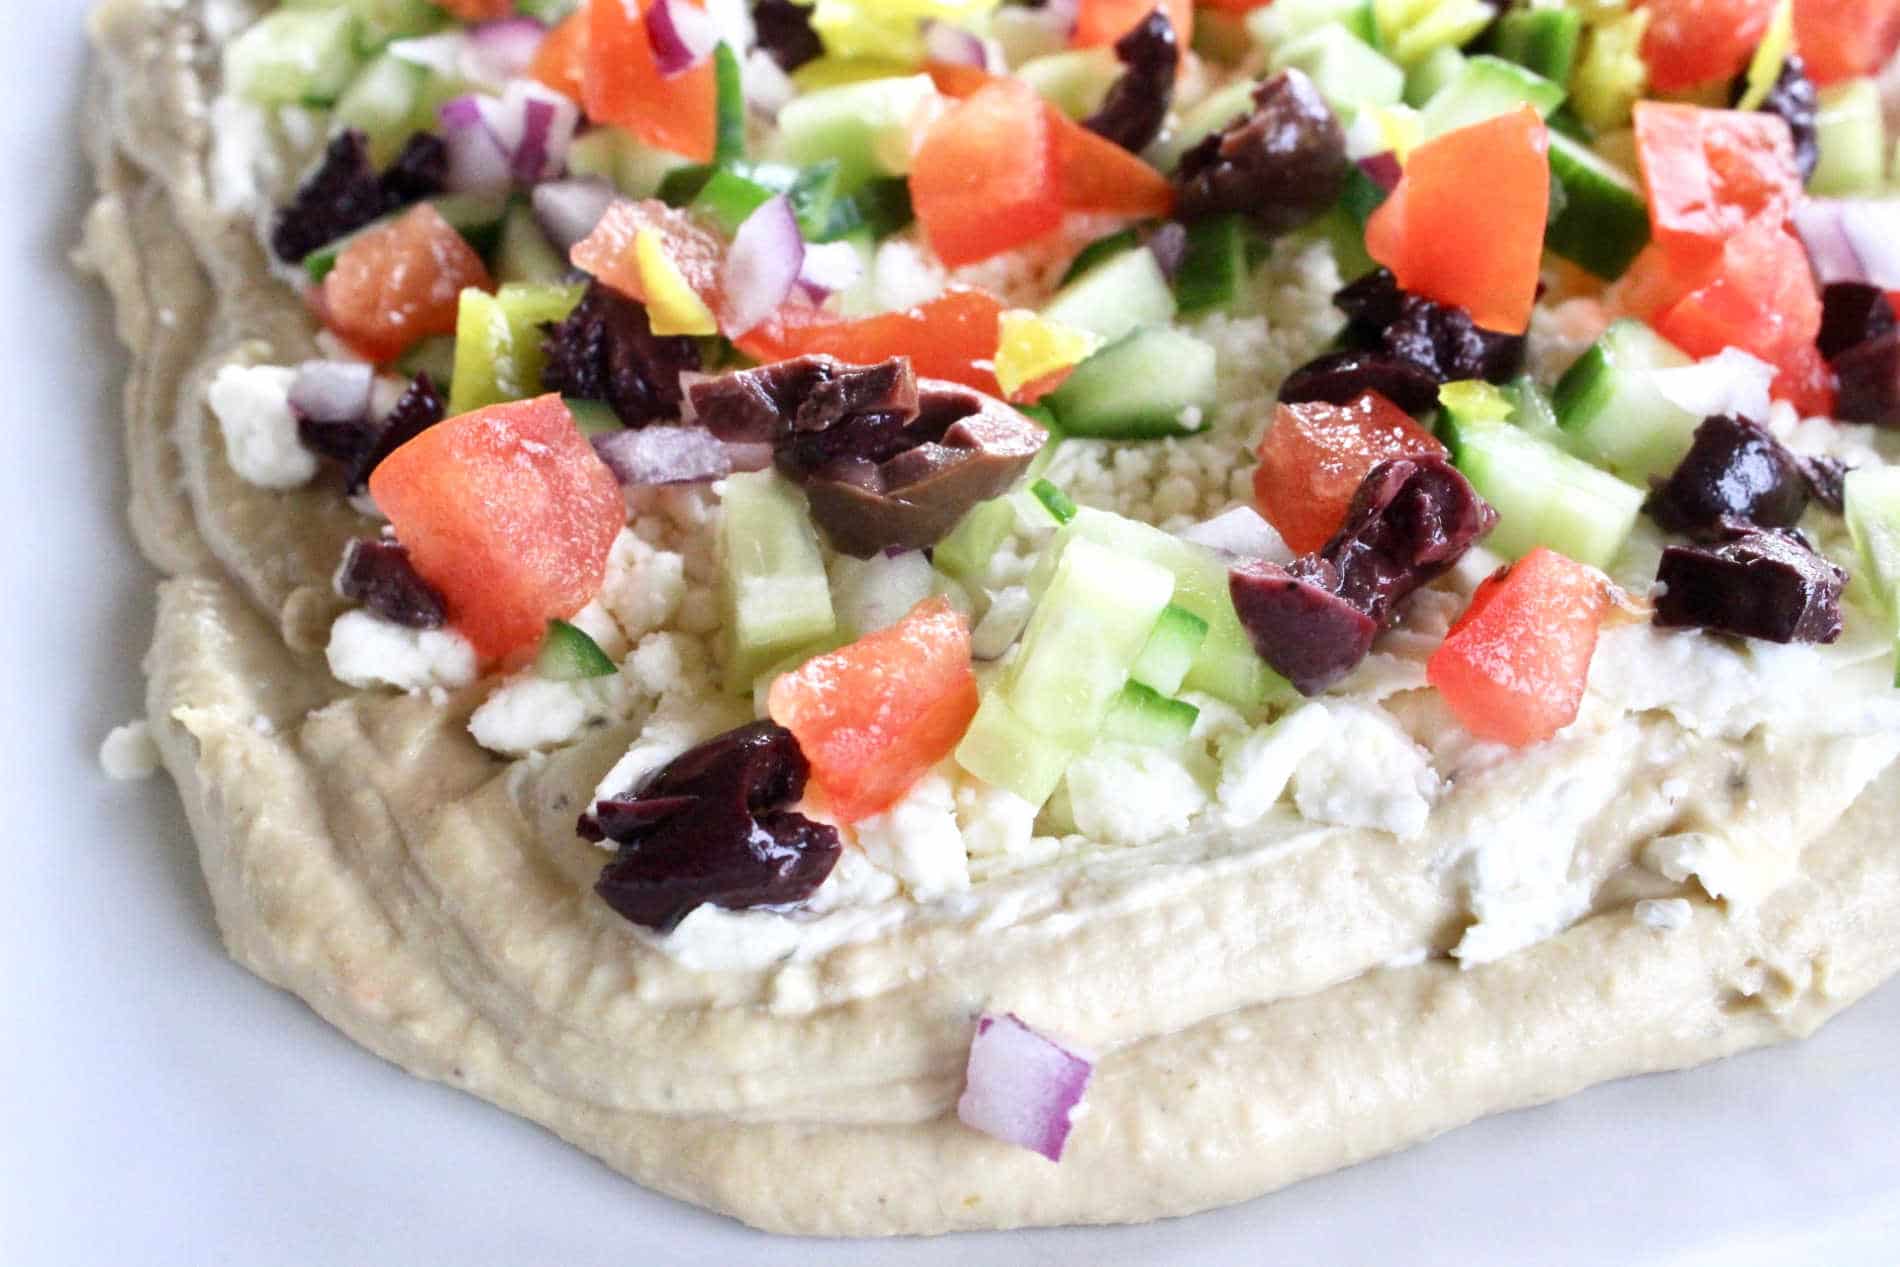 Greek dip with hummus, chopped tomatos, cucumbers, feta and olives